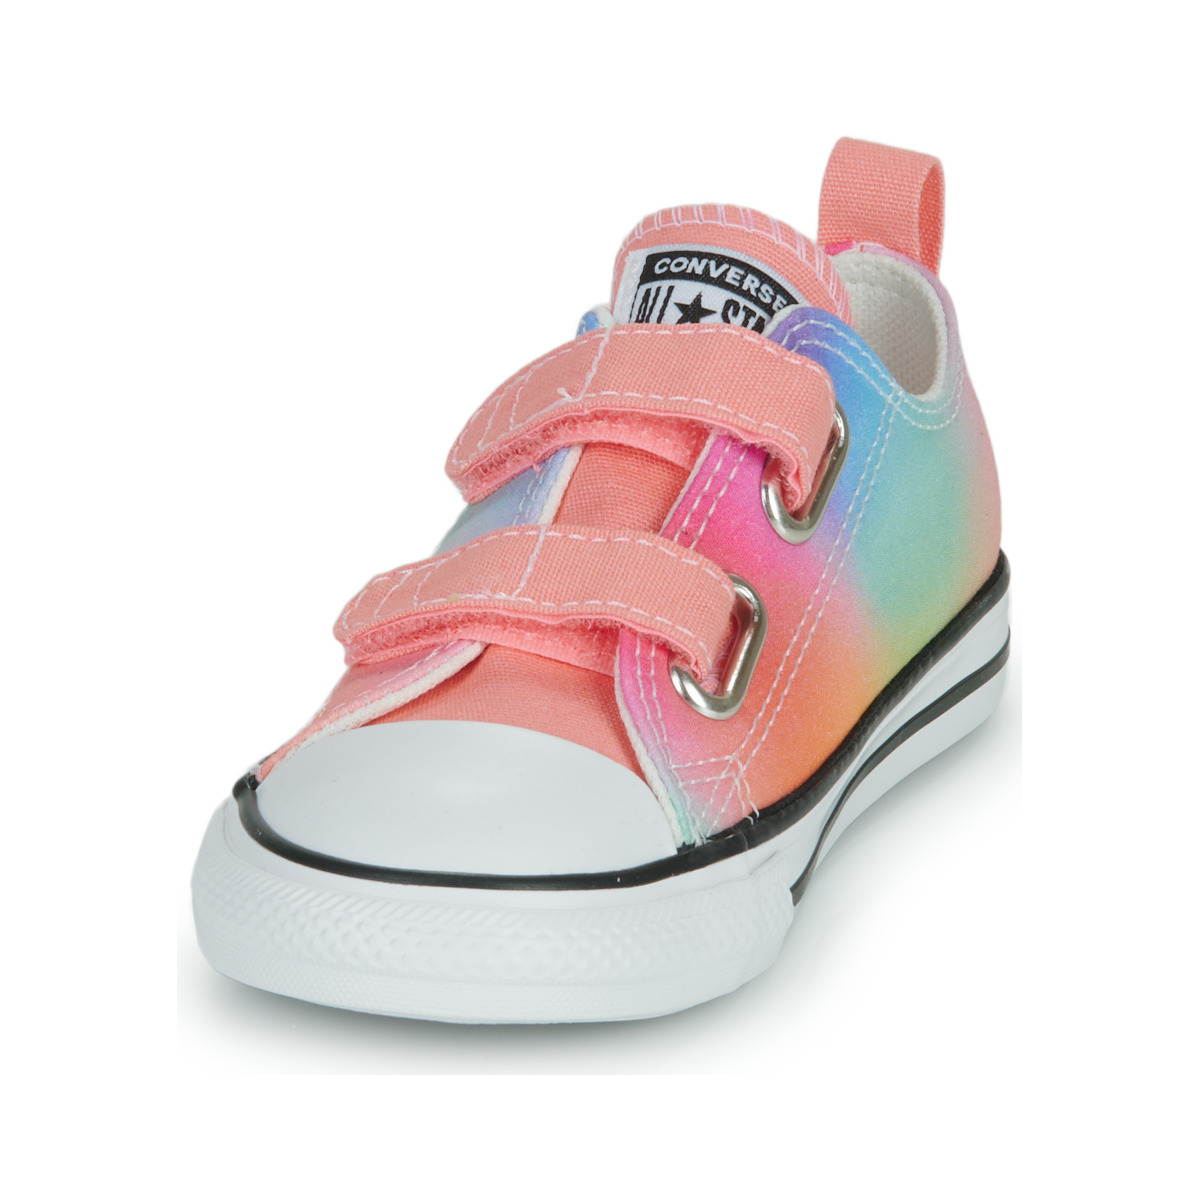 Converse Multicolore INFANT CONVERSE CHUCK TAYLOR ALL STAR 2V EASY-ON MAJESTIC MERMAI ws69aWH7